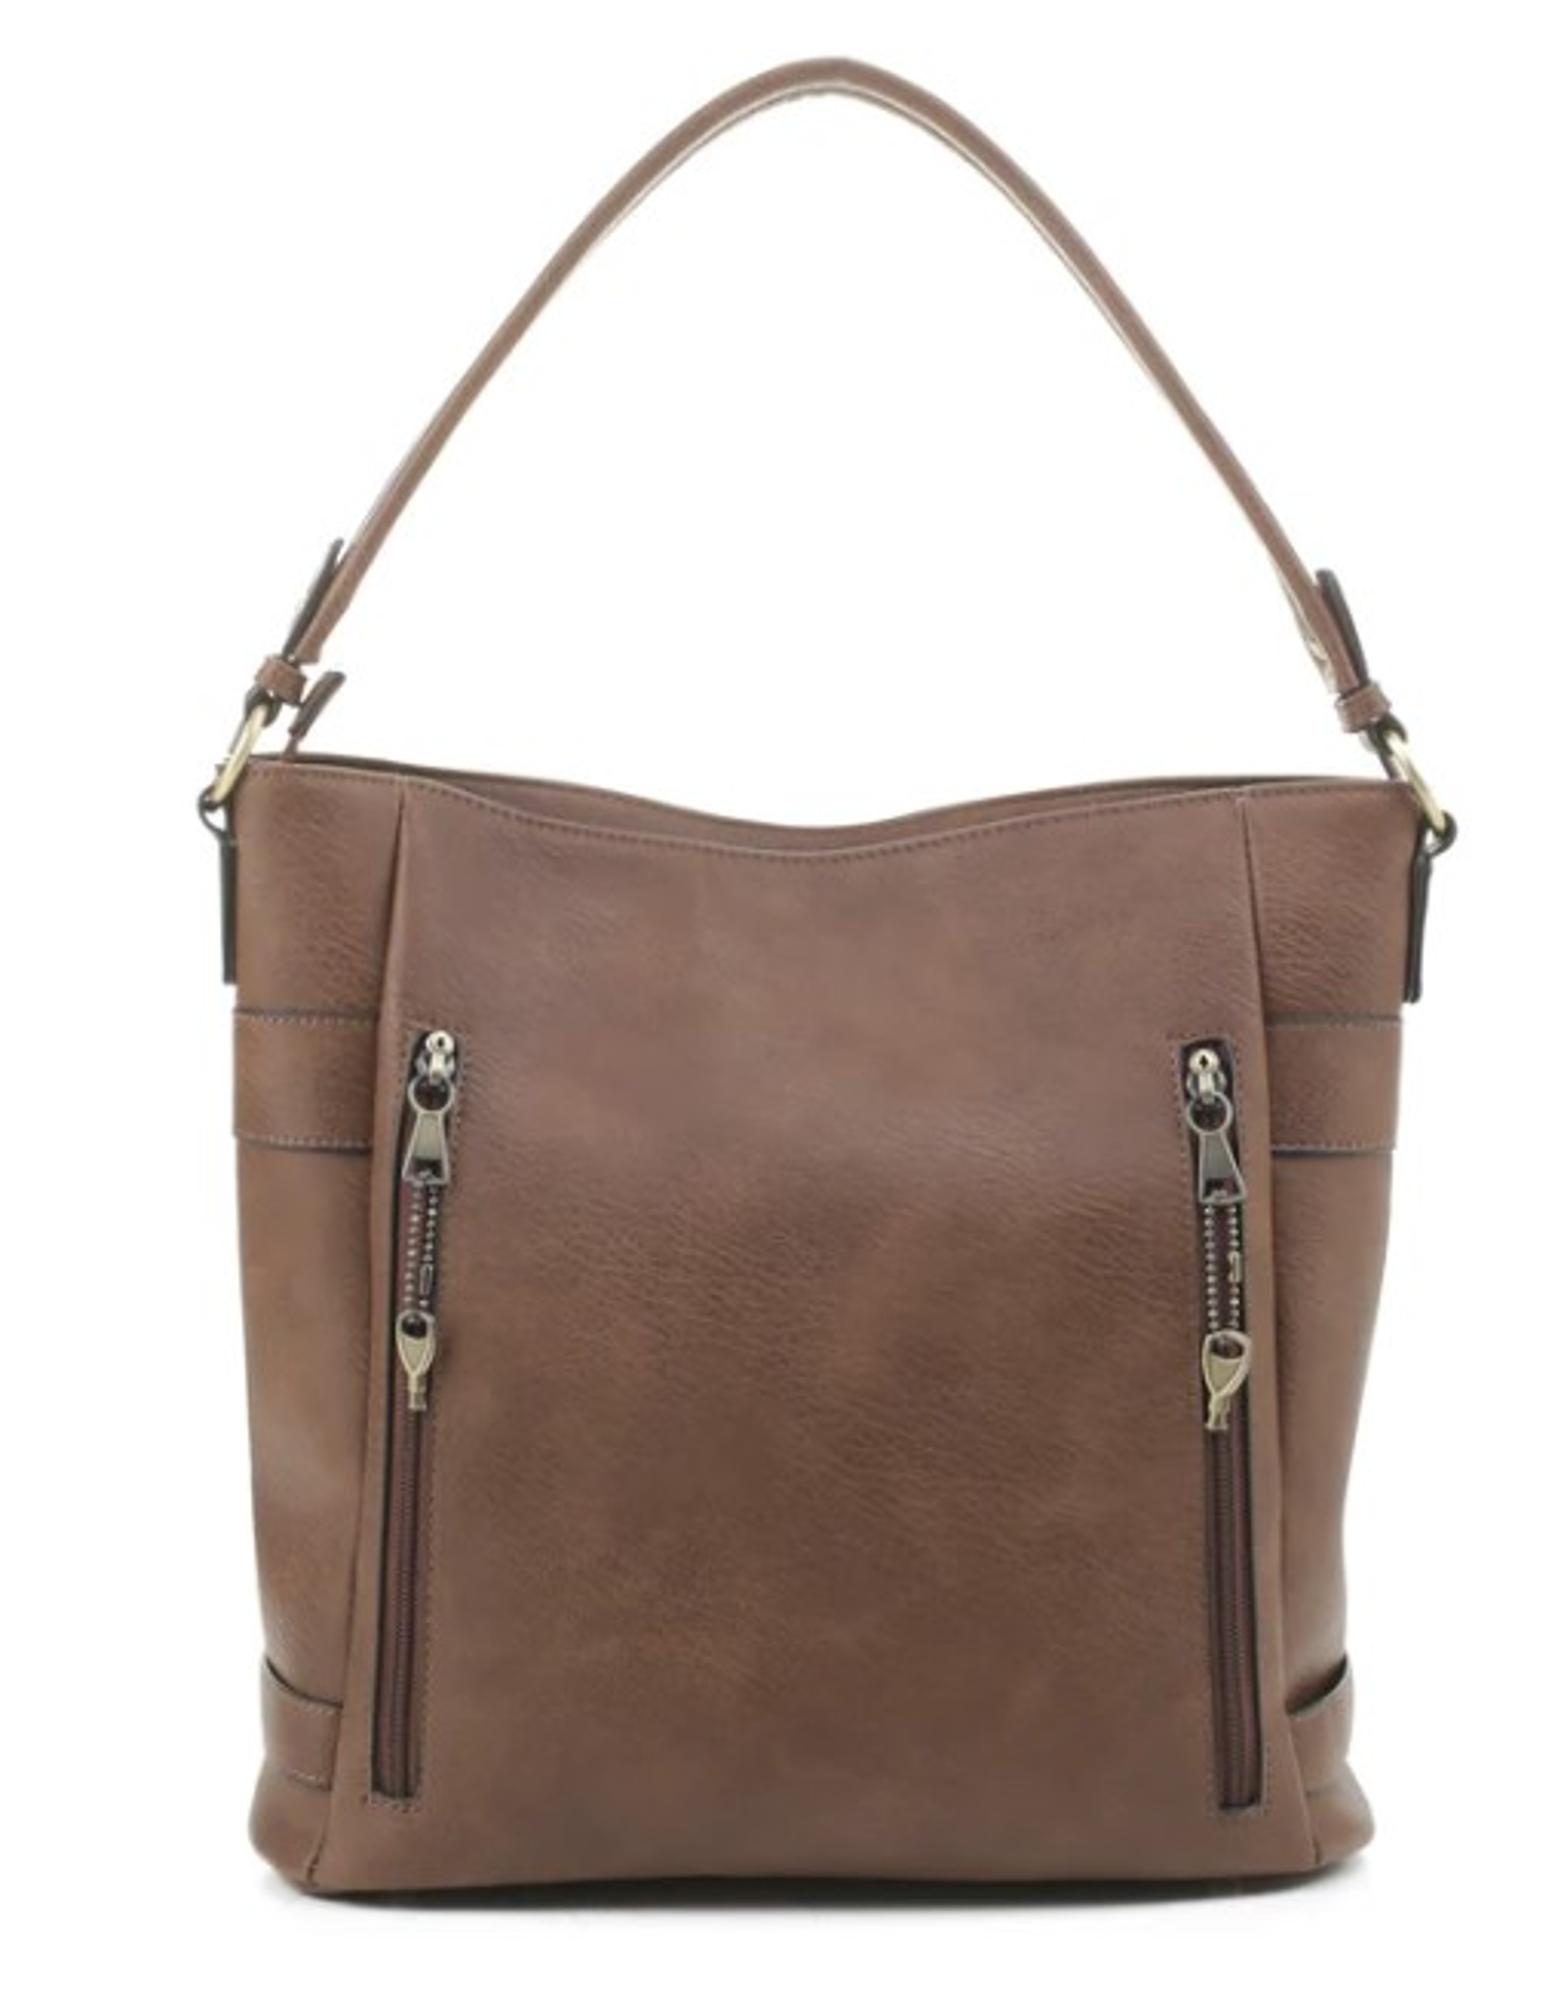 Selina Concealed Carry Hobo Purse